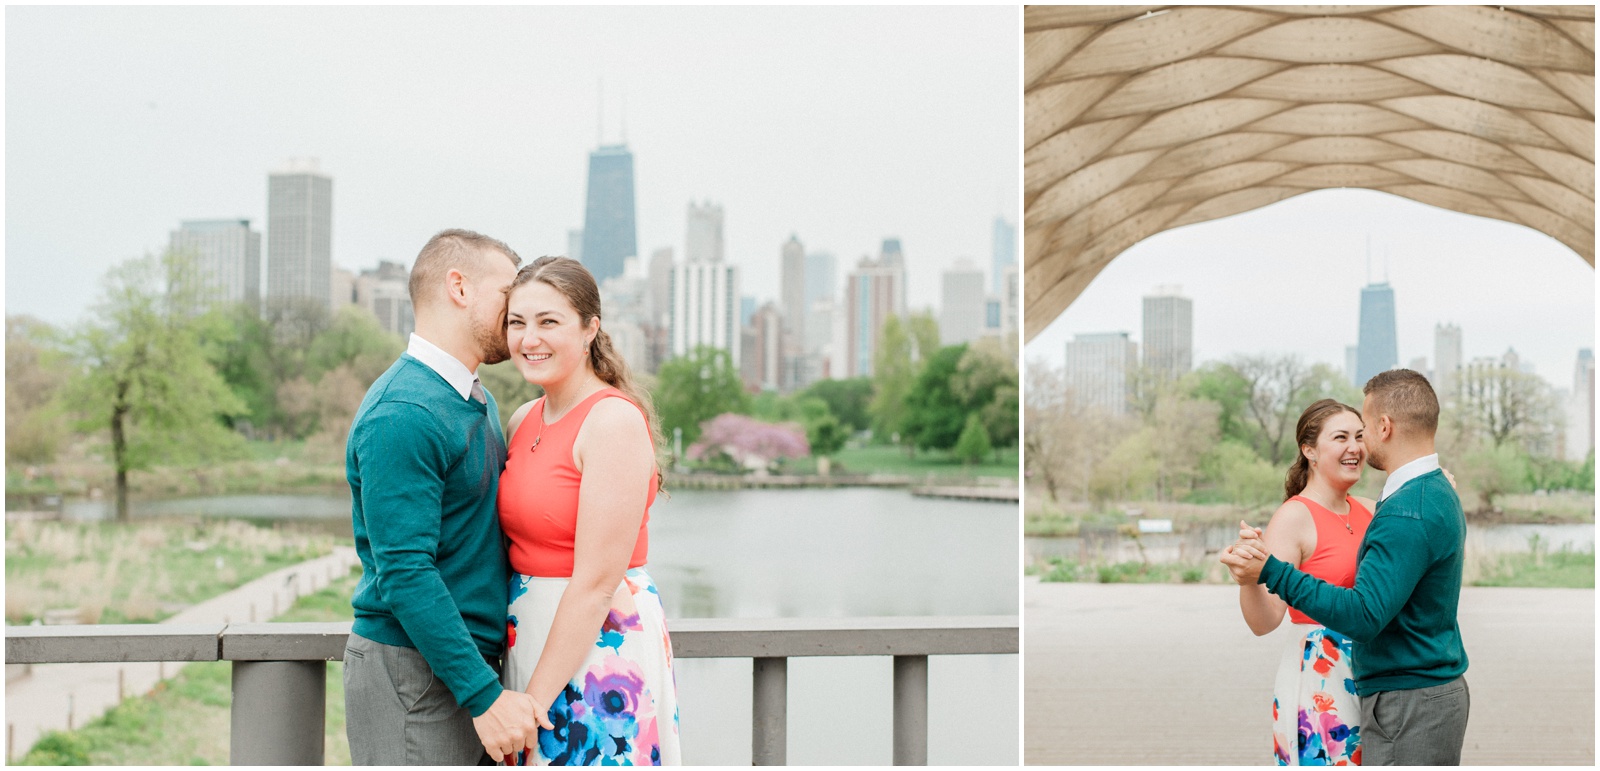 Colorful Spring Engagement Outfits | Couple holding hands on bridge